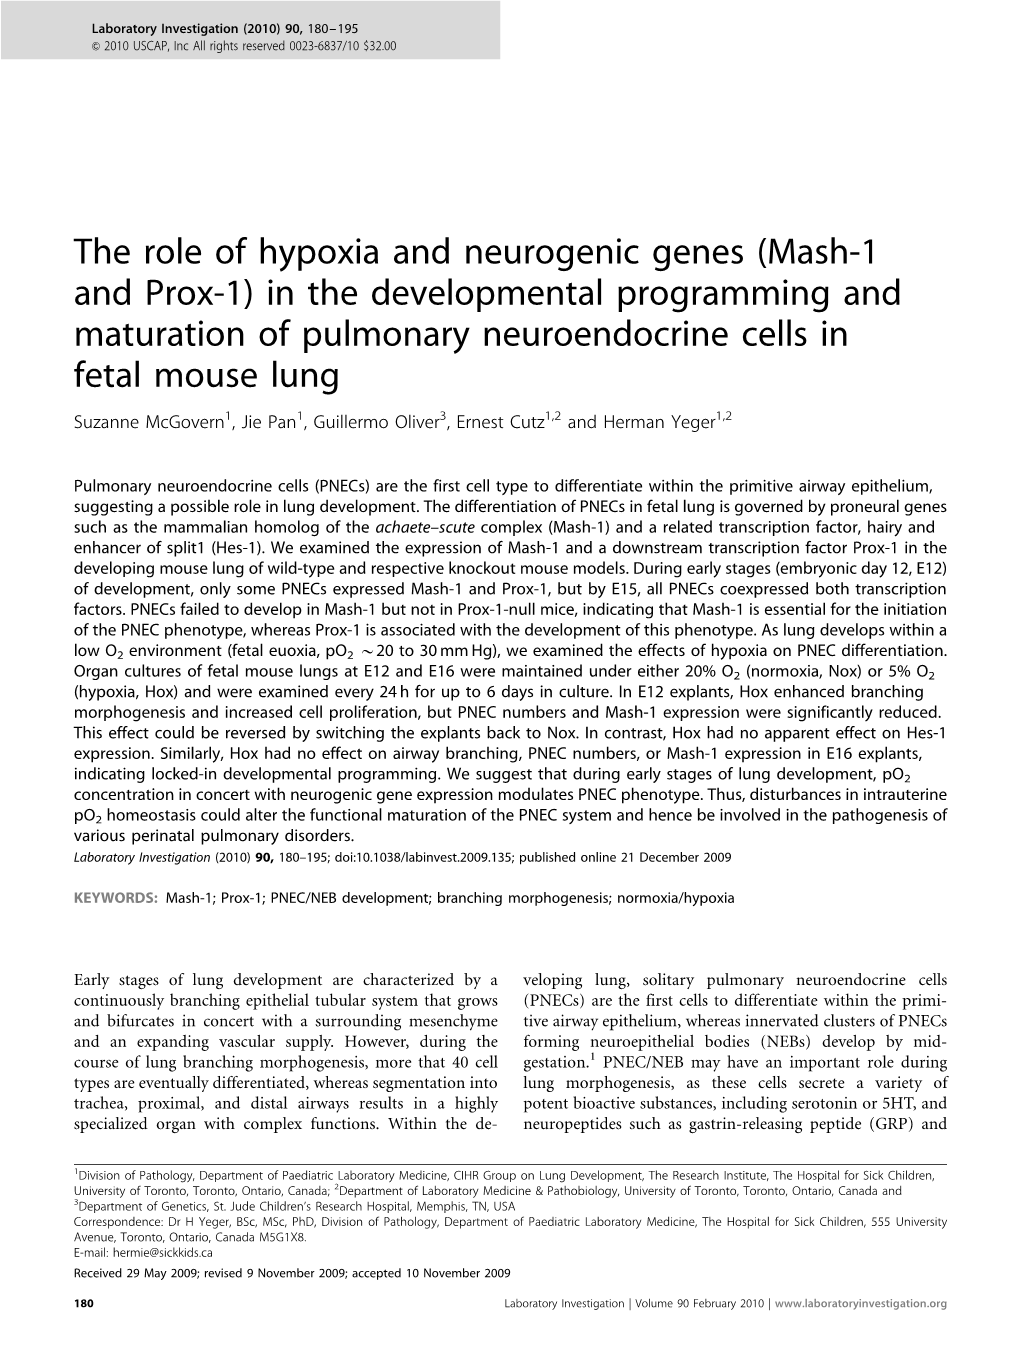 The Role of Hypoxia and Neurogenic Genes